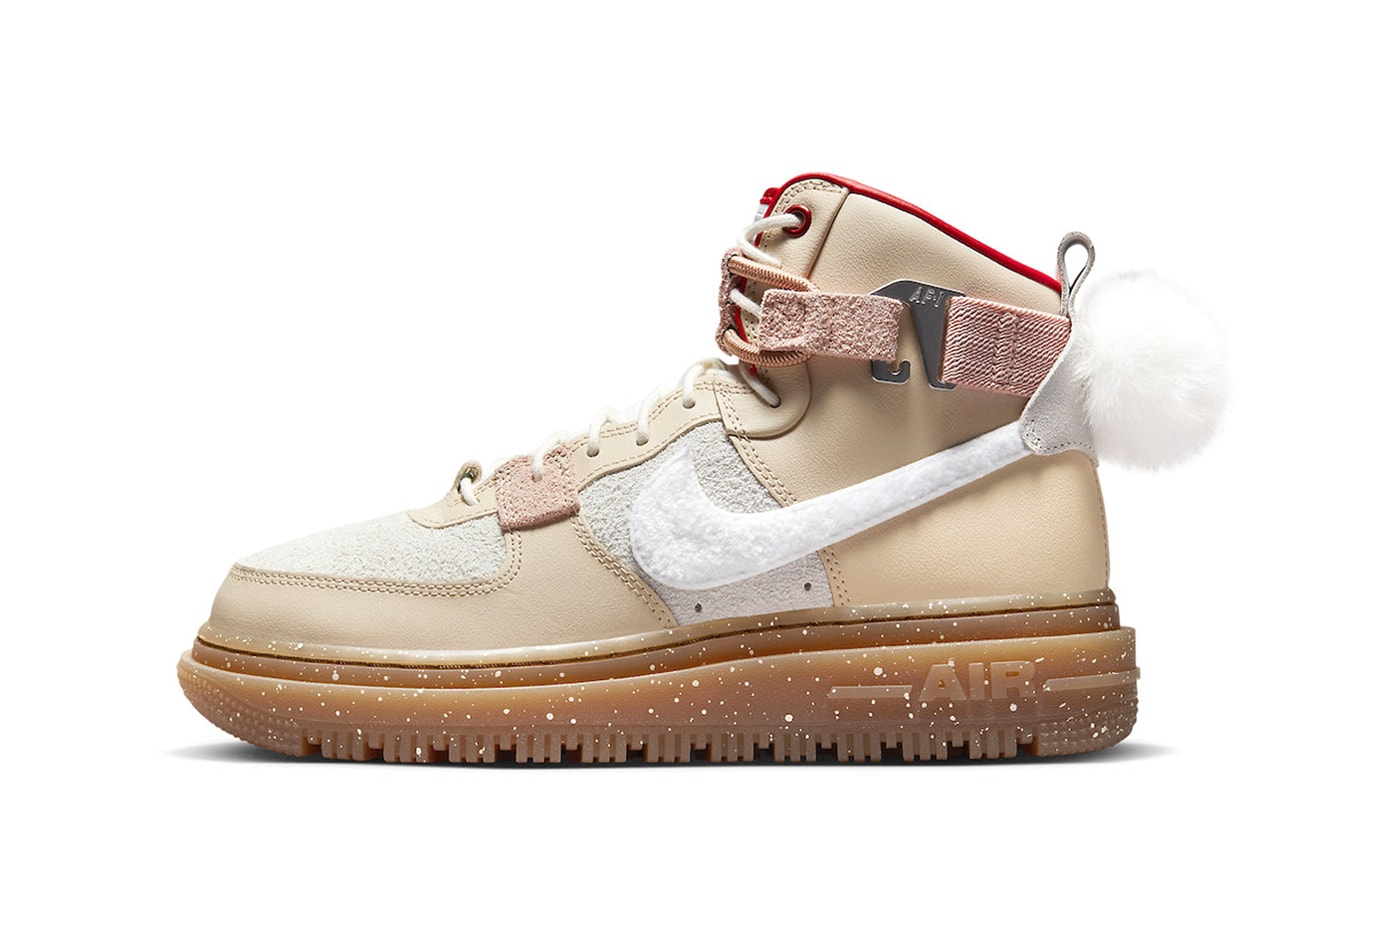 Nike air force 1 high utility 2 0 leap high suede leather white fuzzy chenille pom pom tan speckled red release info date price